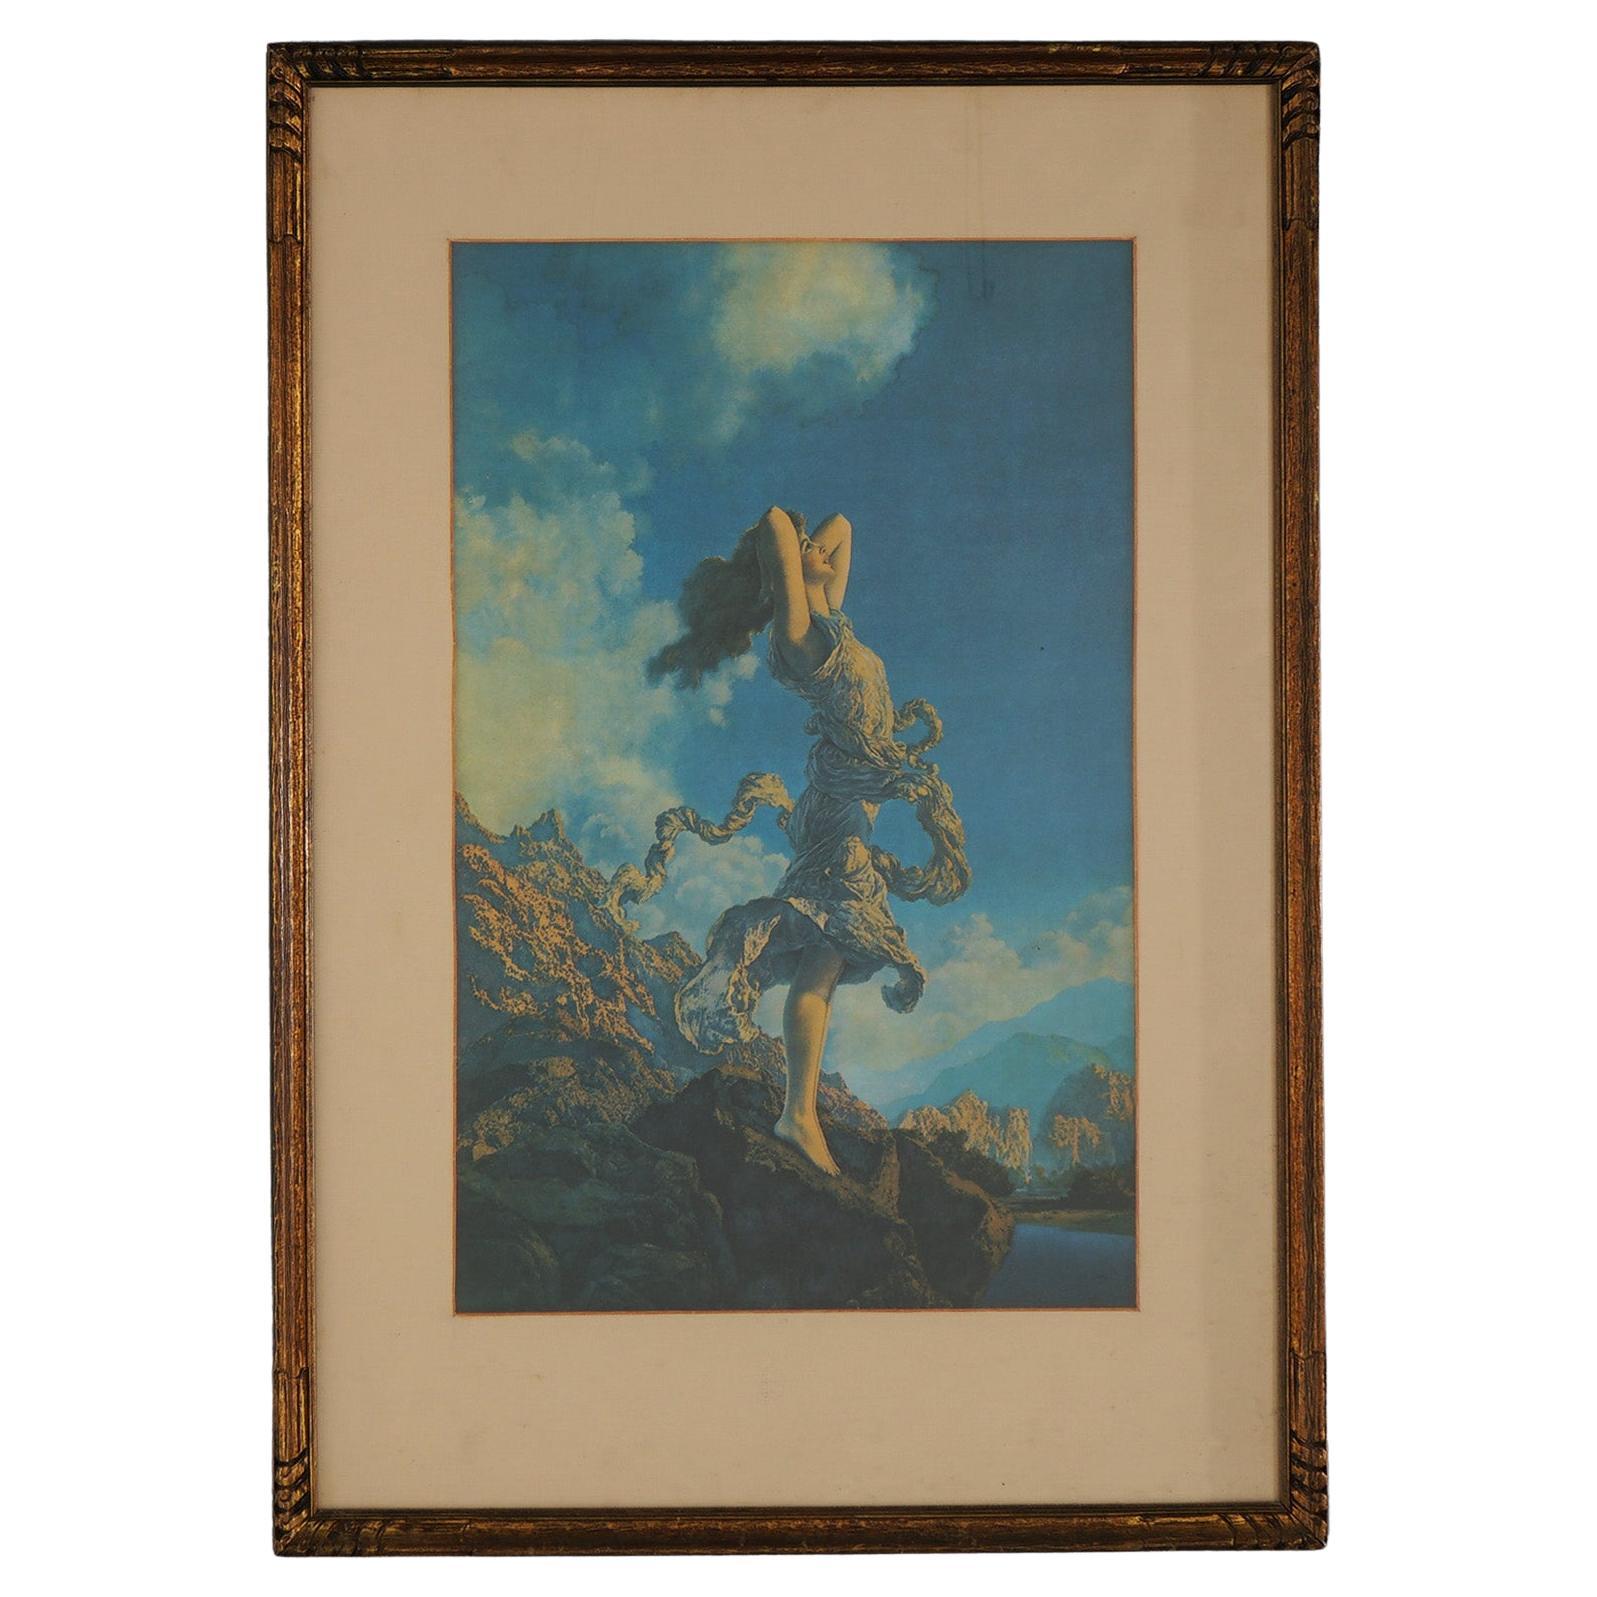 Large Maxfield Parrish Art Deco Print “Ecstasy”, Framed, C1920 For Sale